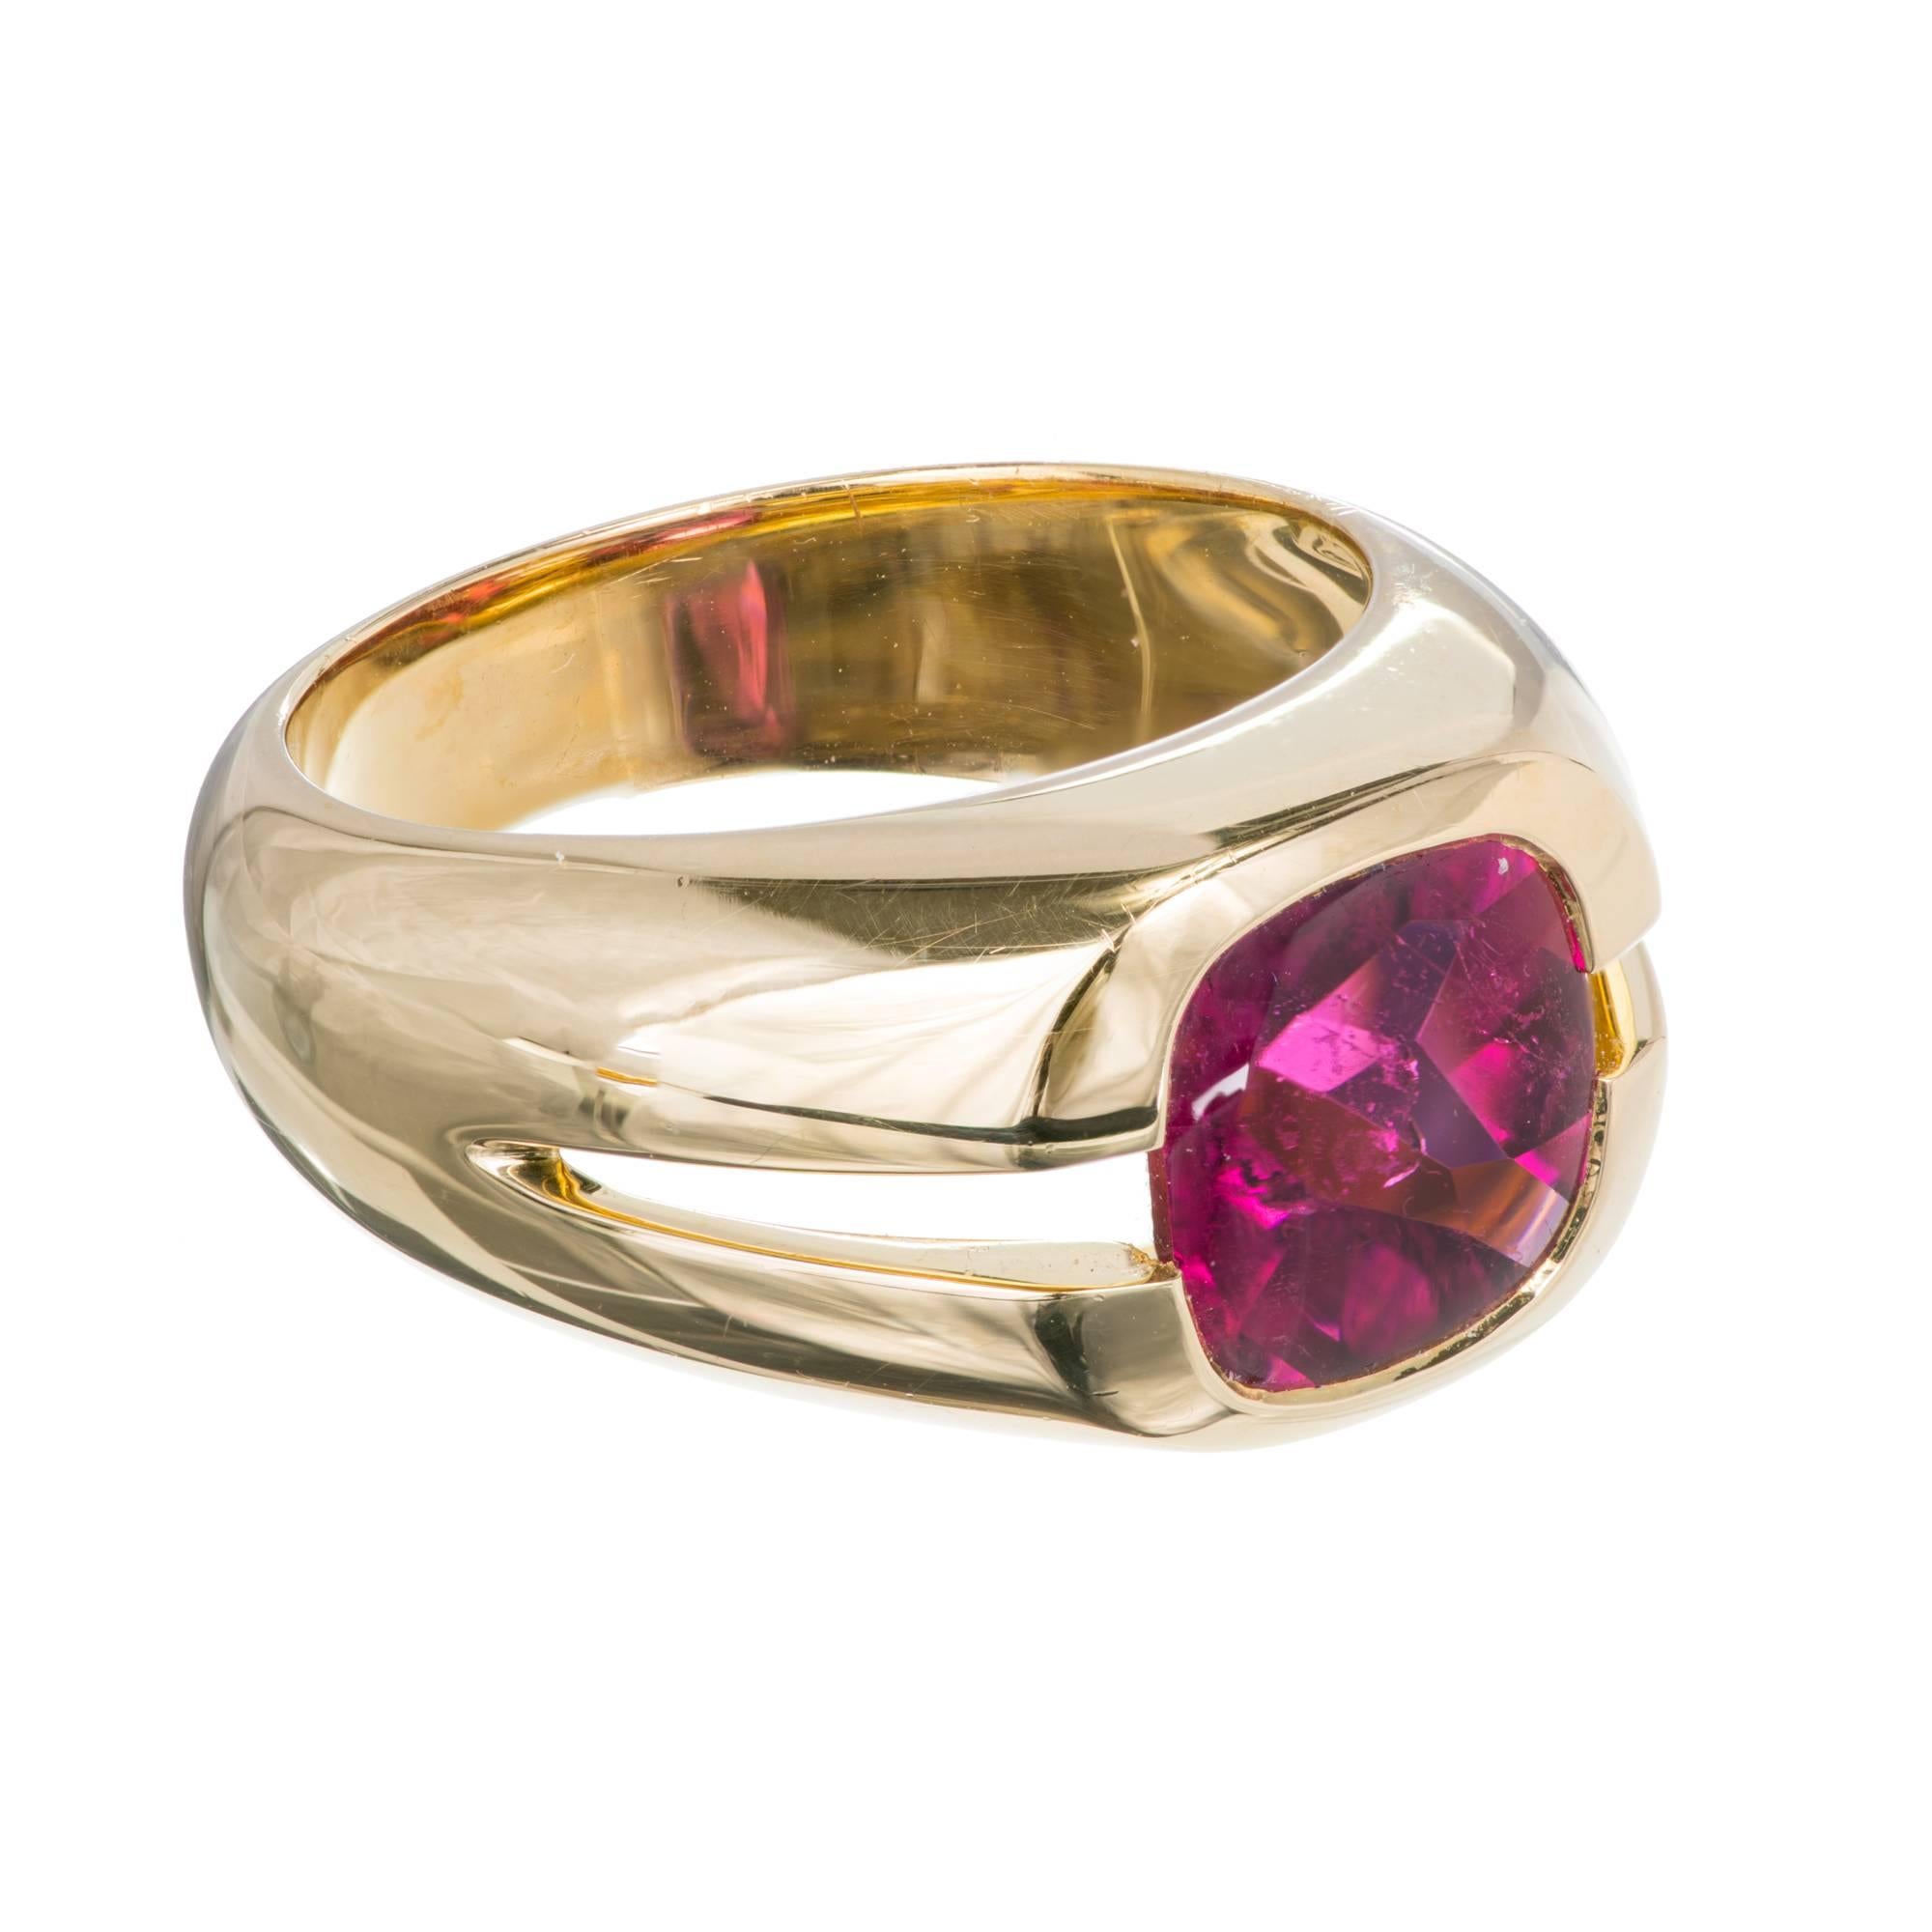 Tiffany & Co. 18k yellow gold ring with bright pink cushion tourmaline.

1 cushion pink tourmaline, approx. total weight 1.50cts, 7.91 x 7.84 x 5.22mm
18k yellow gold
Tested: 18k
Stamped: 750
Hallmark: © 2000 Tiffany & Co
10.1 grams
Width at top: